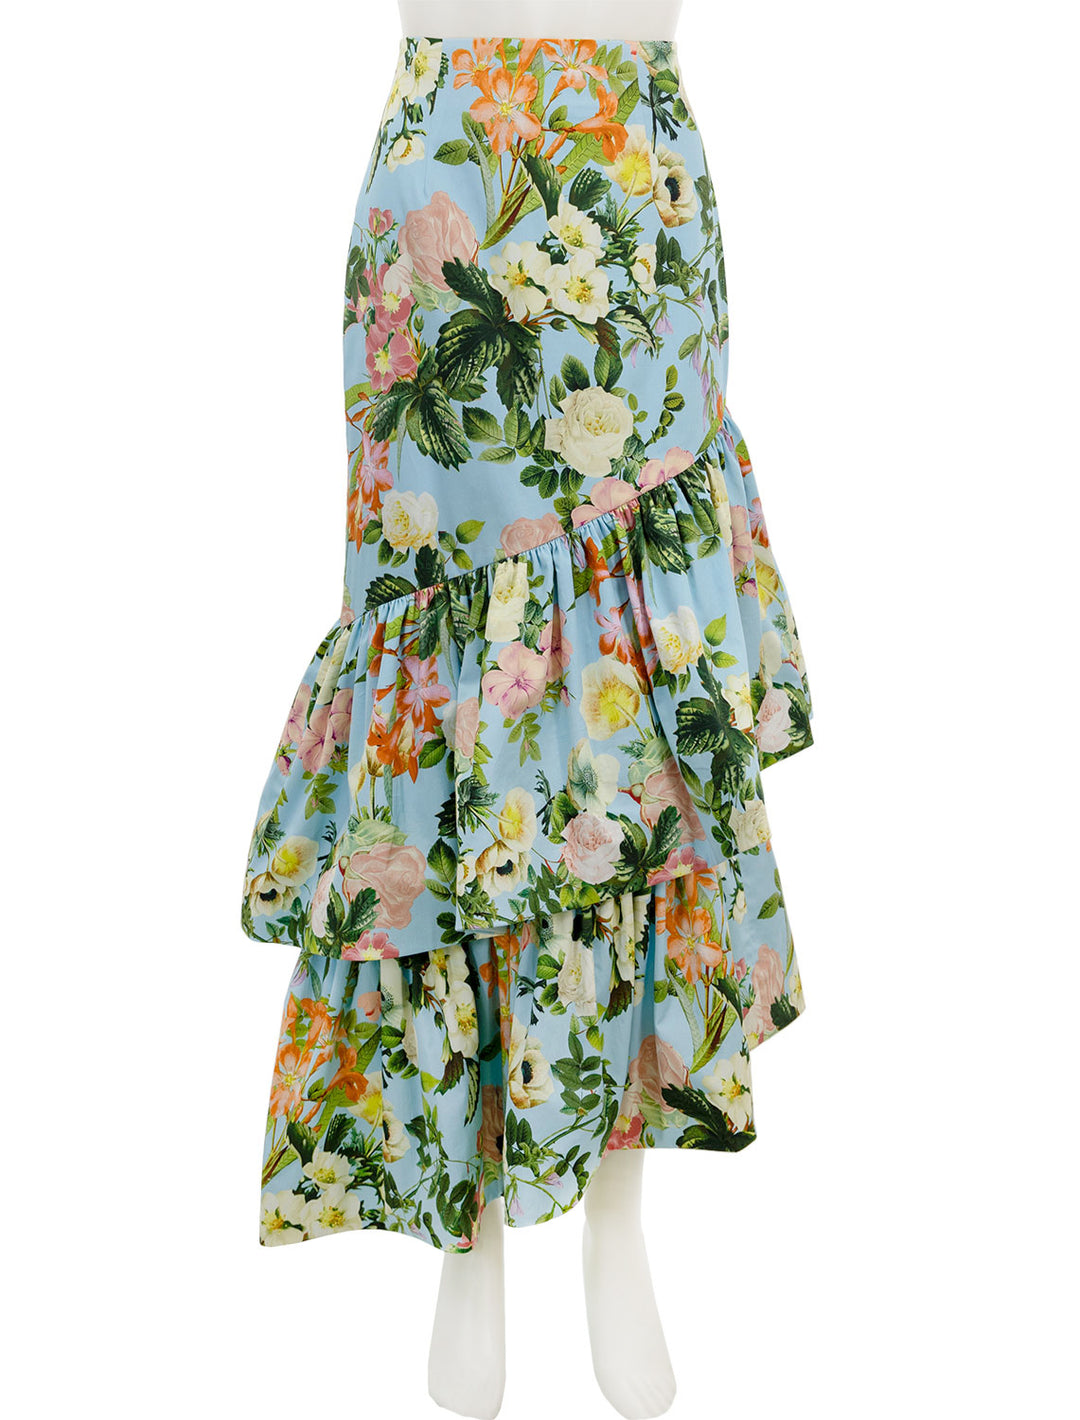 Front view of Cara Cara's perla skirt in light blue kingston floral.